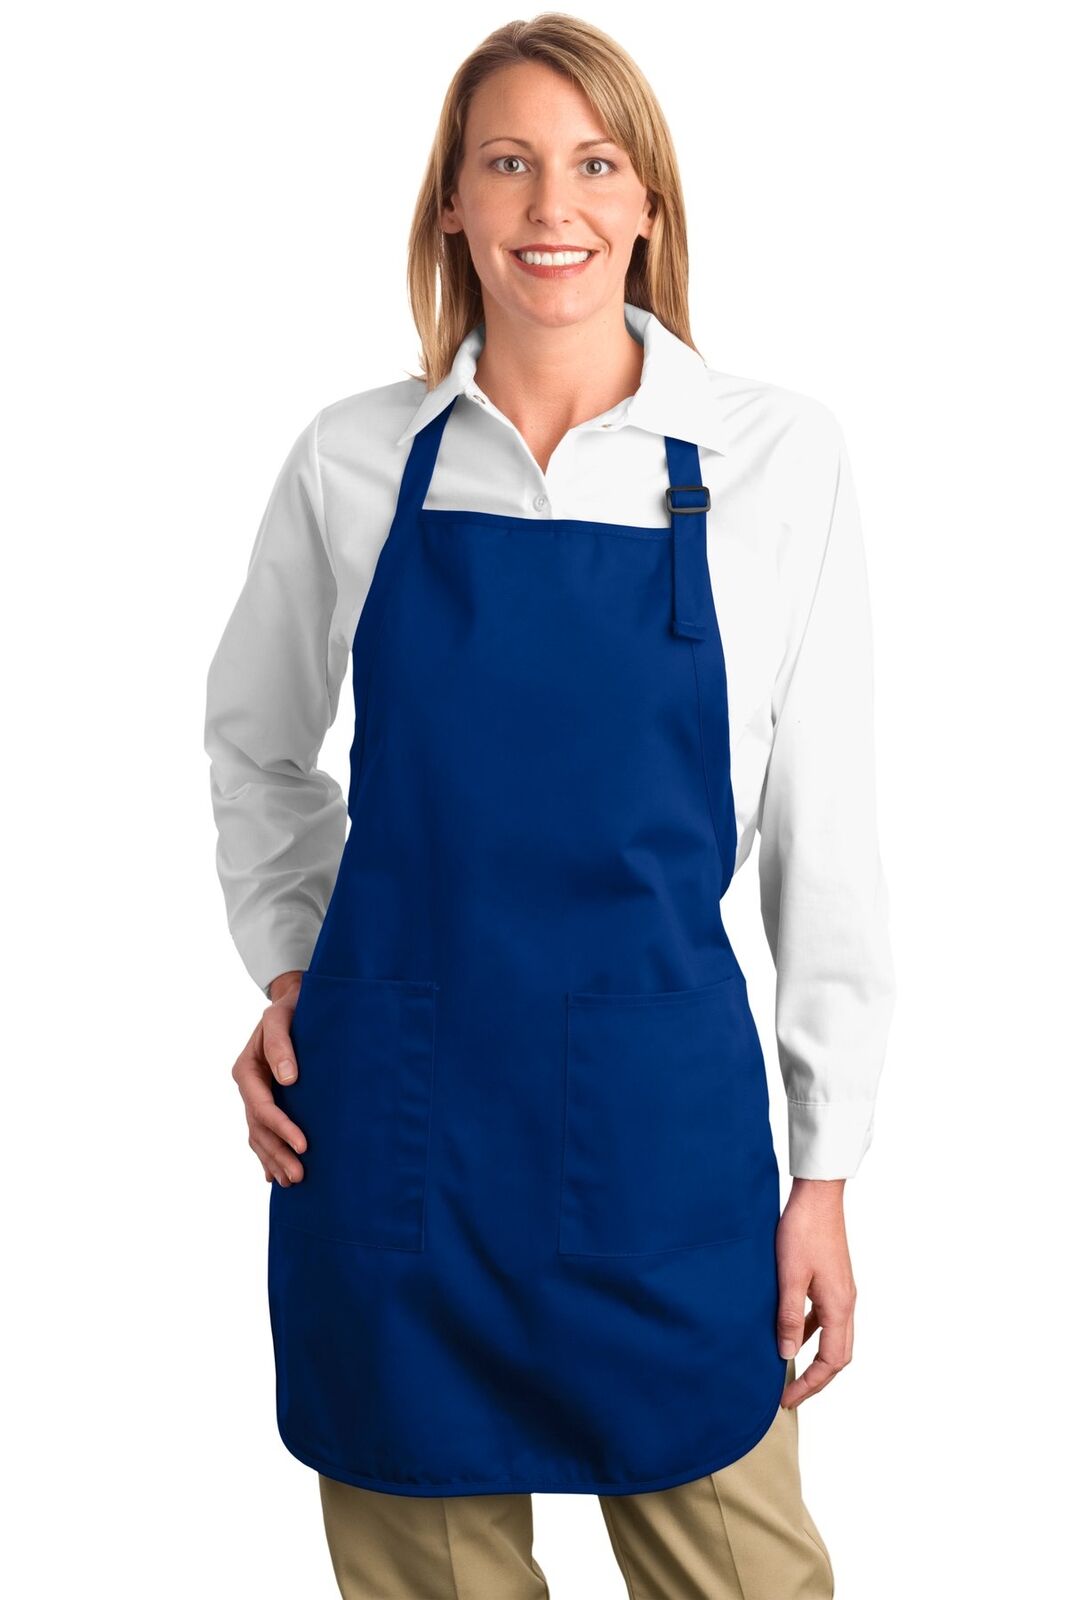 Port Authority Full-Length Apron with Pockets - A500